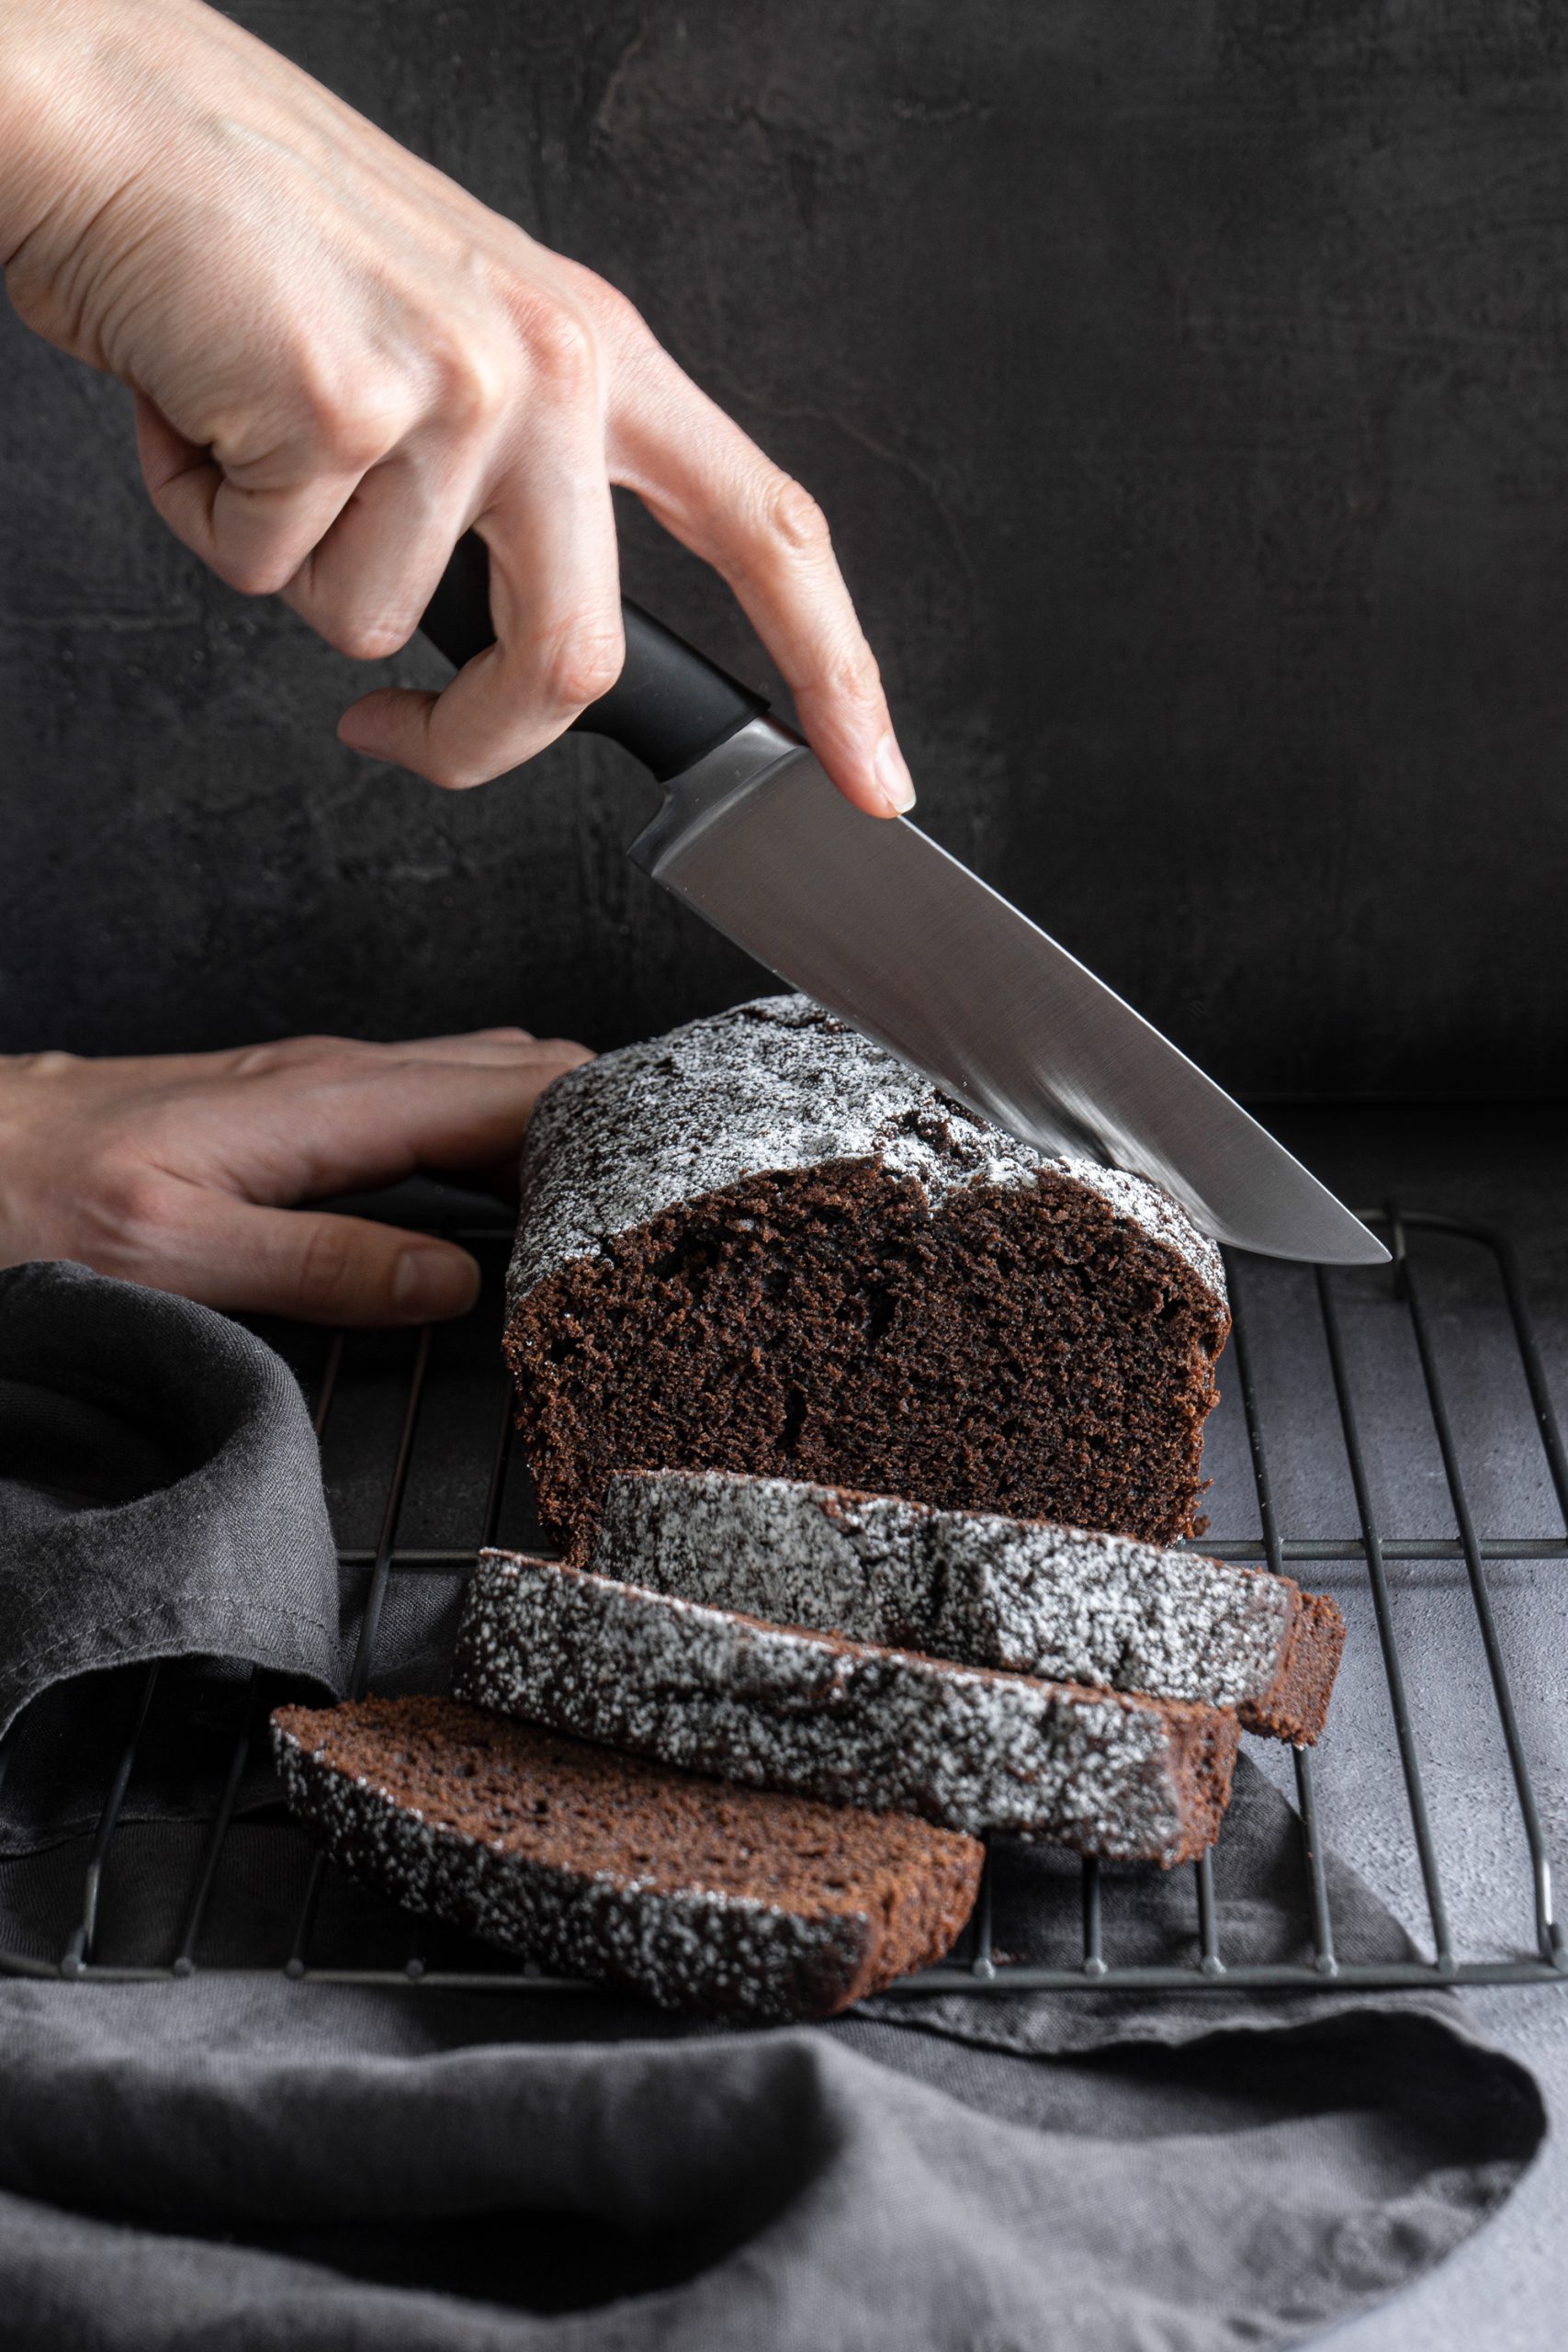 Moist chocolate loaf cake being sliced